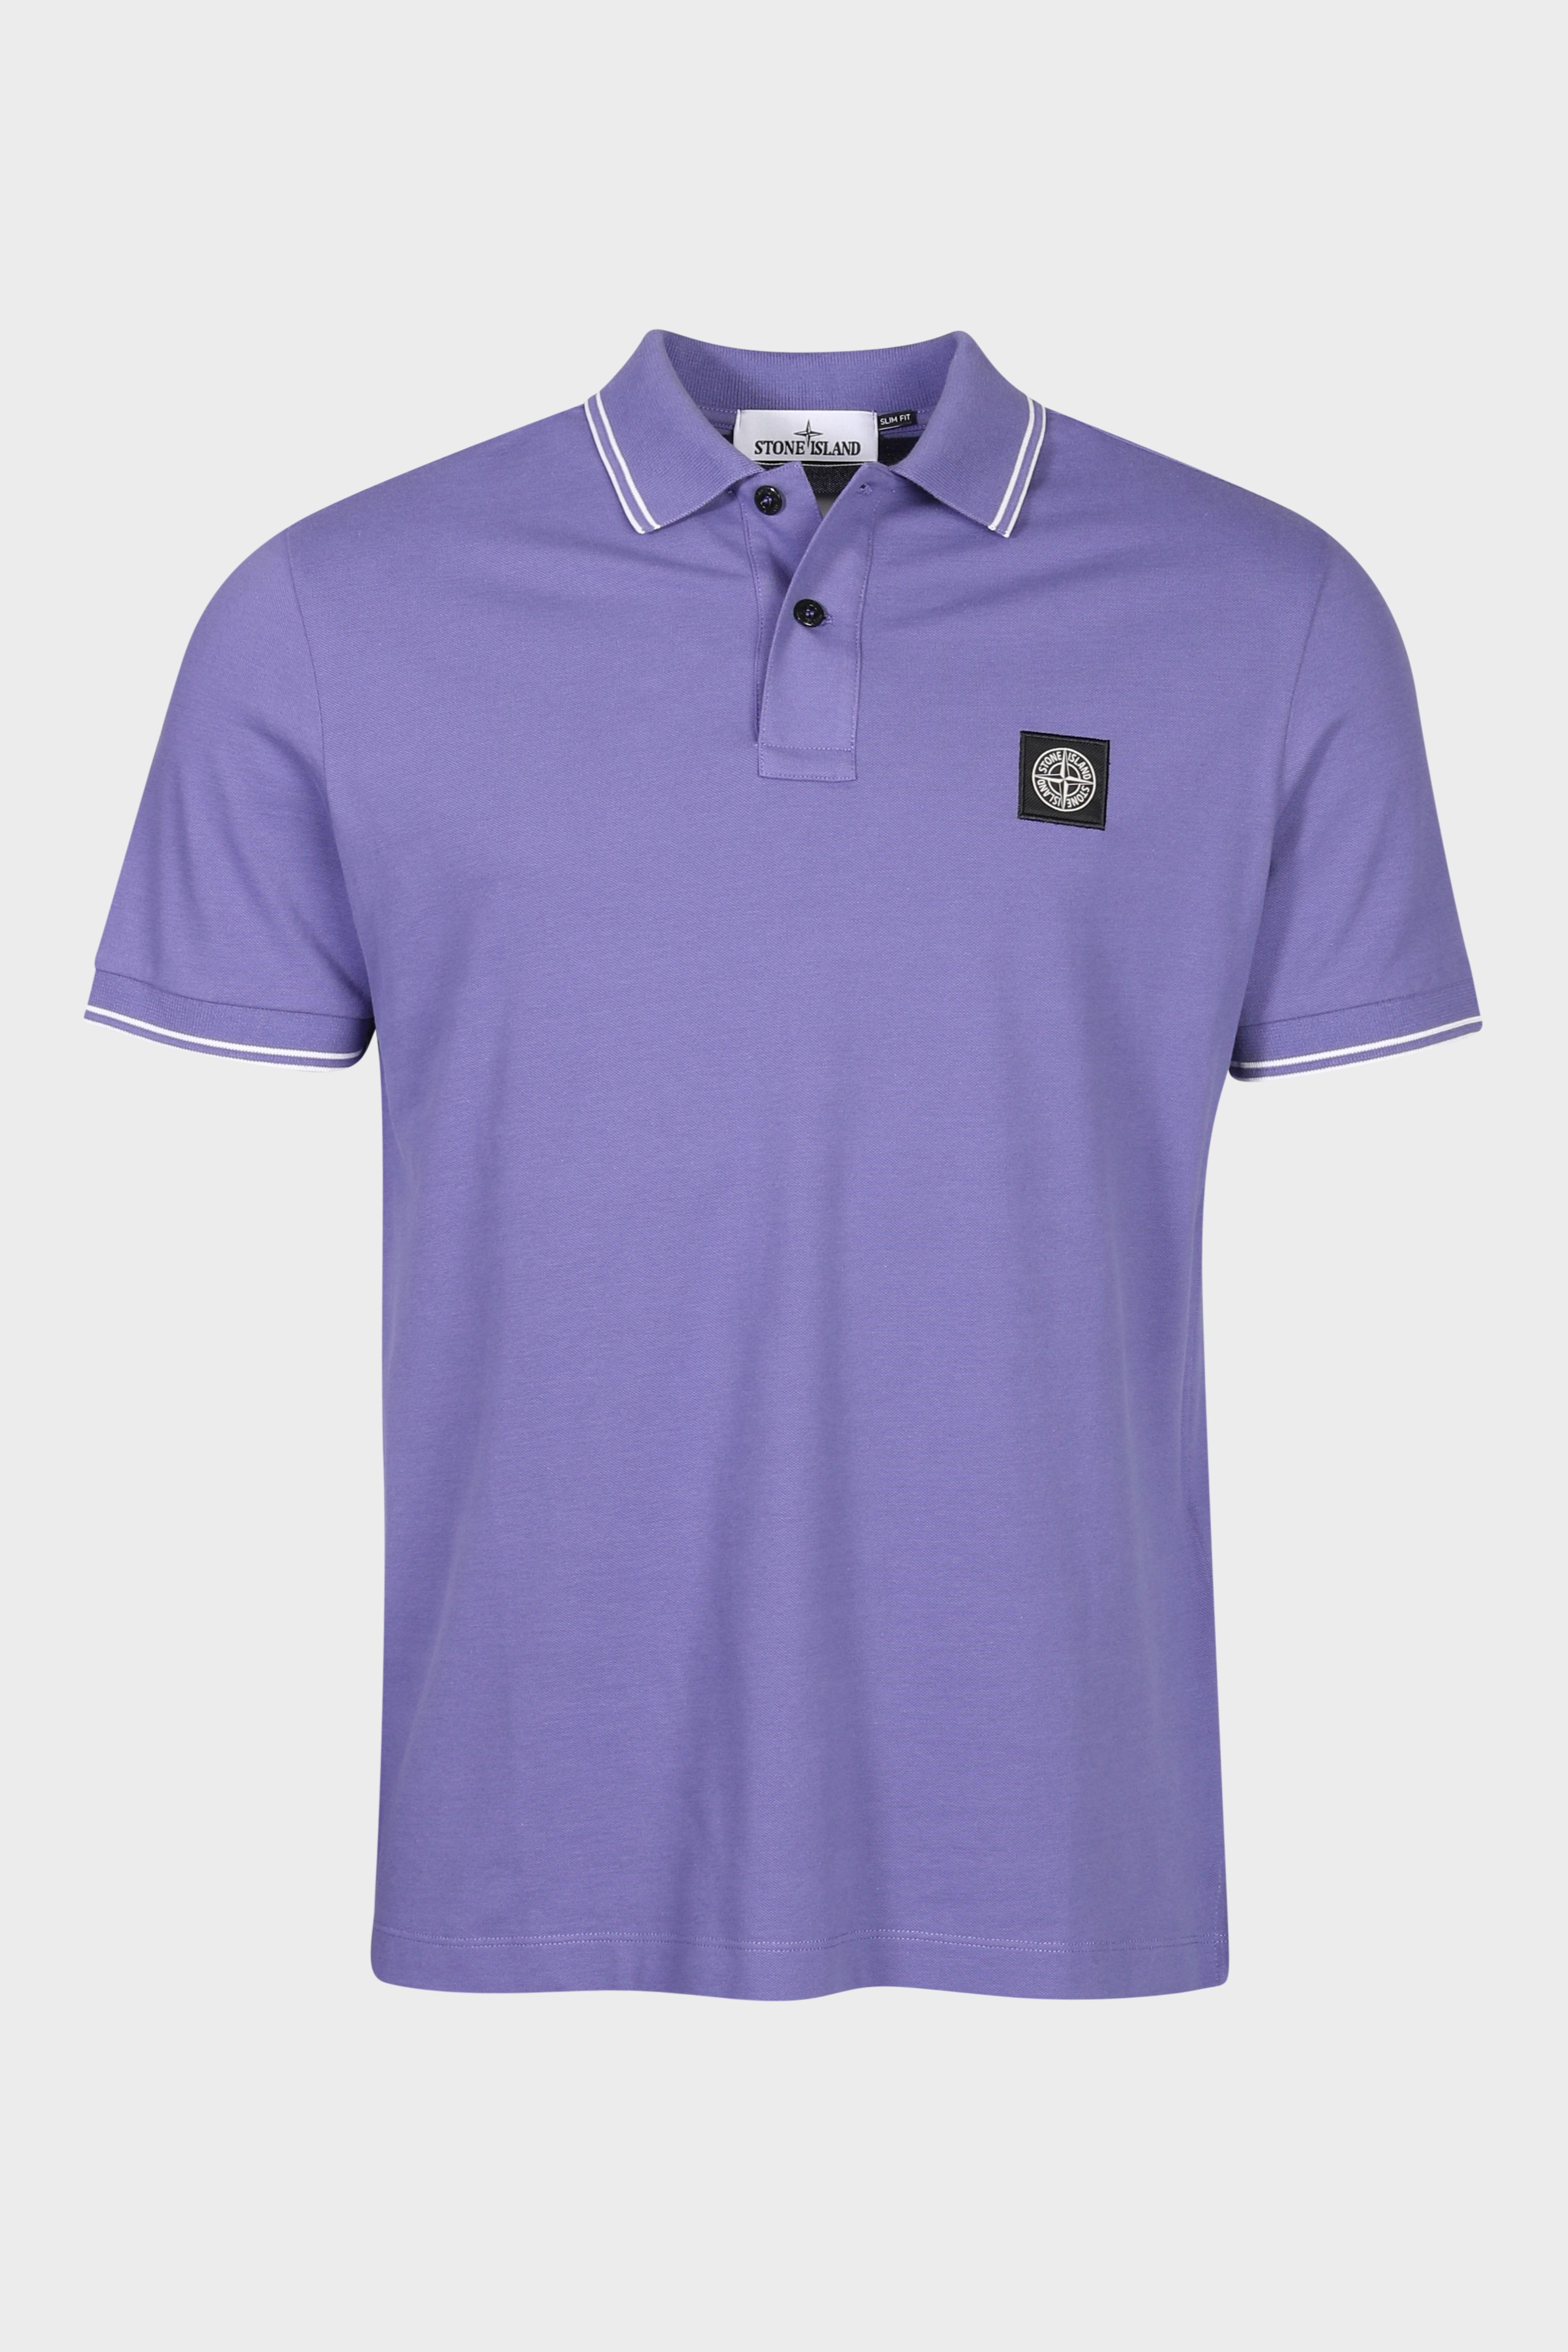 STONE ISLAND Slim Fit Polo Shirt in Lilac